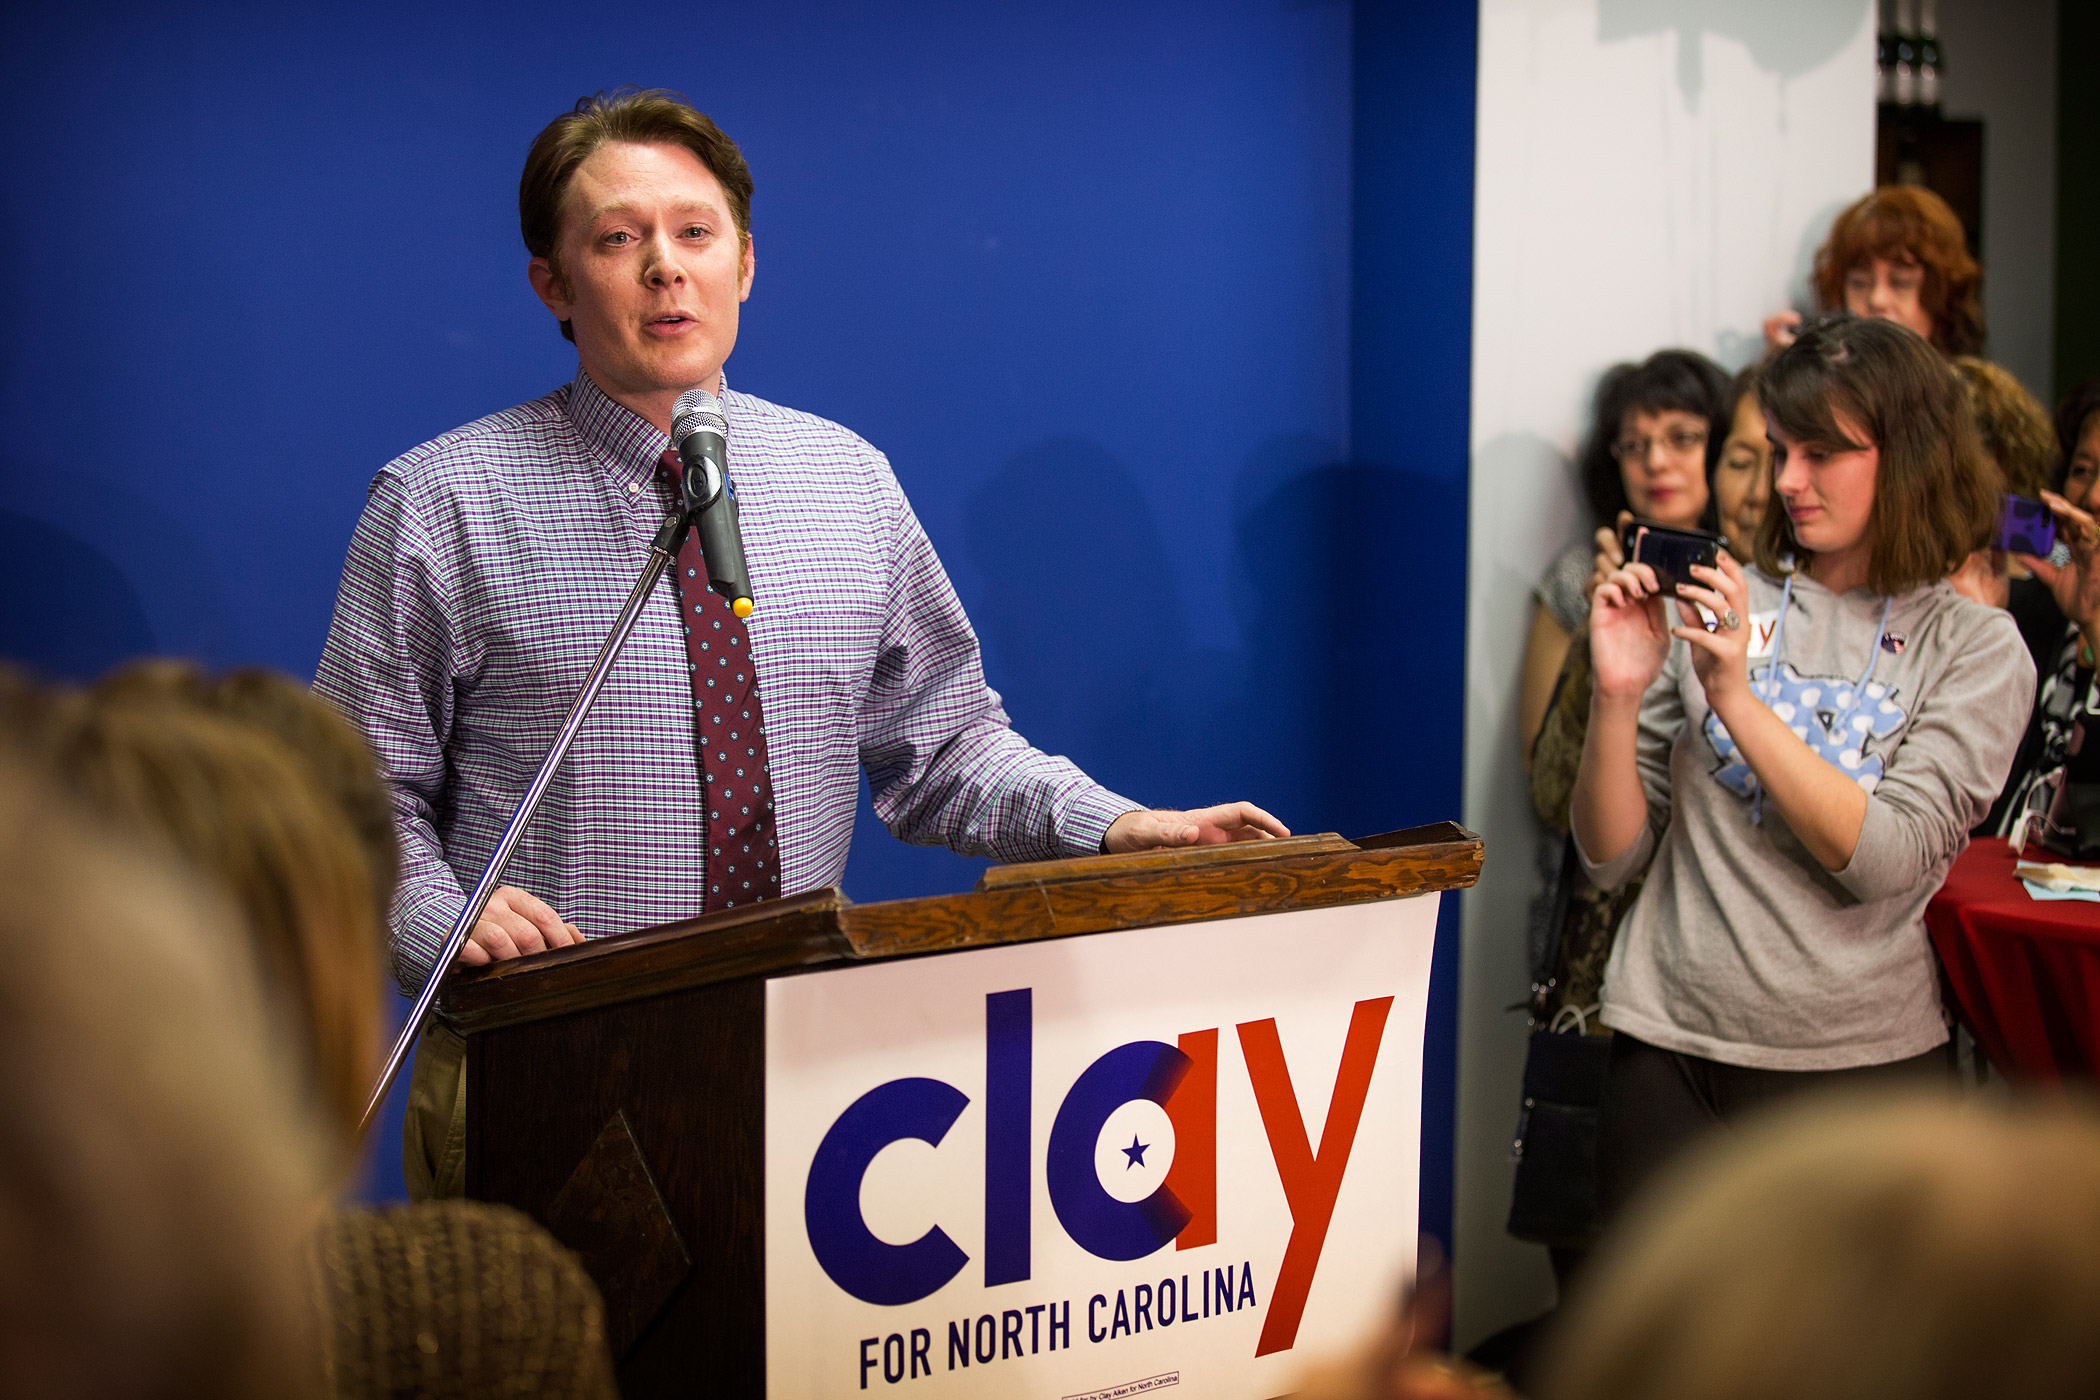 Clay Aiken, Democratic candidate for U.S. representative of North Carolina's 2nd Congressional District, gives his concession speech in Sanford, N.C. on Nov. 4, 2014 after losing to Republican incumbent Renee Ellmers. (Abbi O'Leary—The Fayetteville Observer/AP)